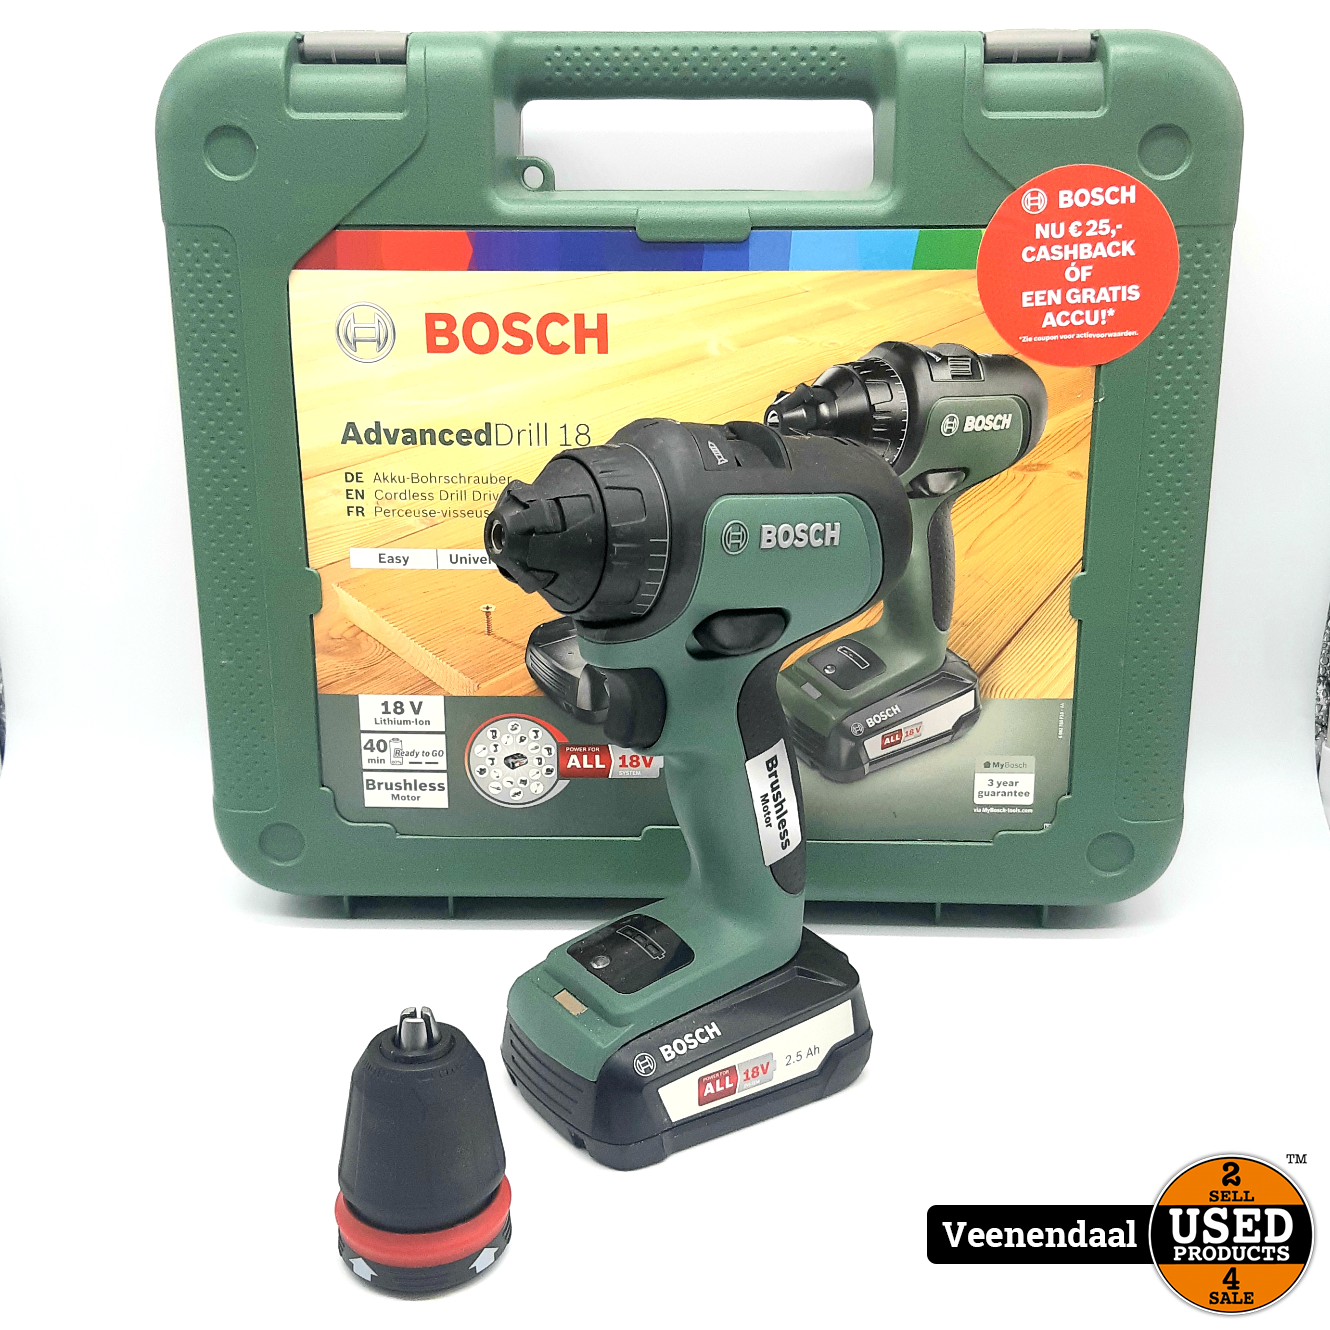 Bosch 18 18V Slagboormachine Goede Staat - Used Veenendaal